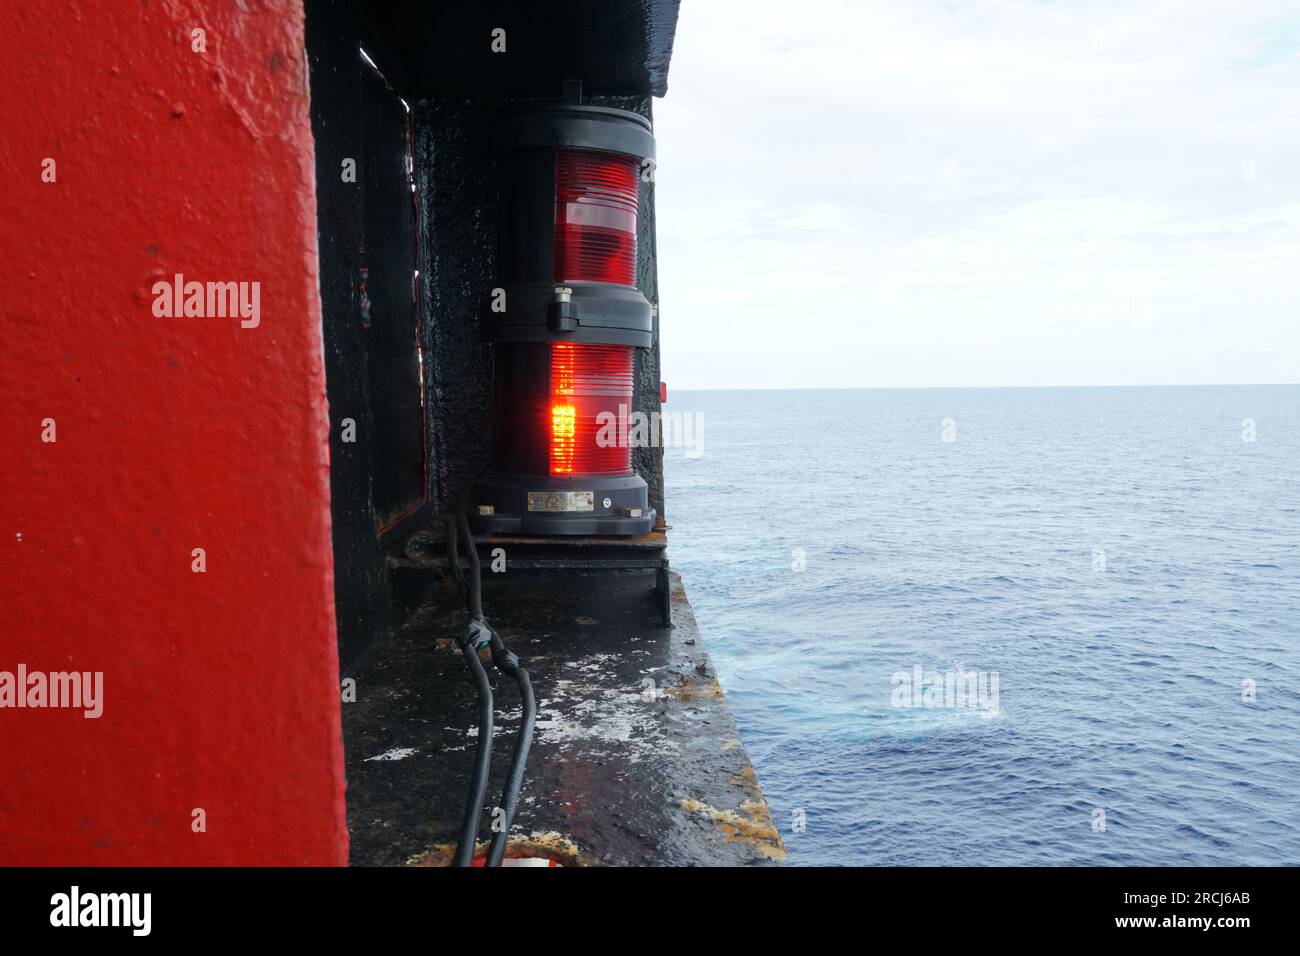 Red port side navigational lights of ship is situated next to superstructure. Stock Photo